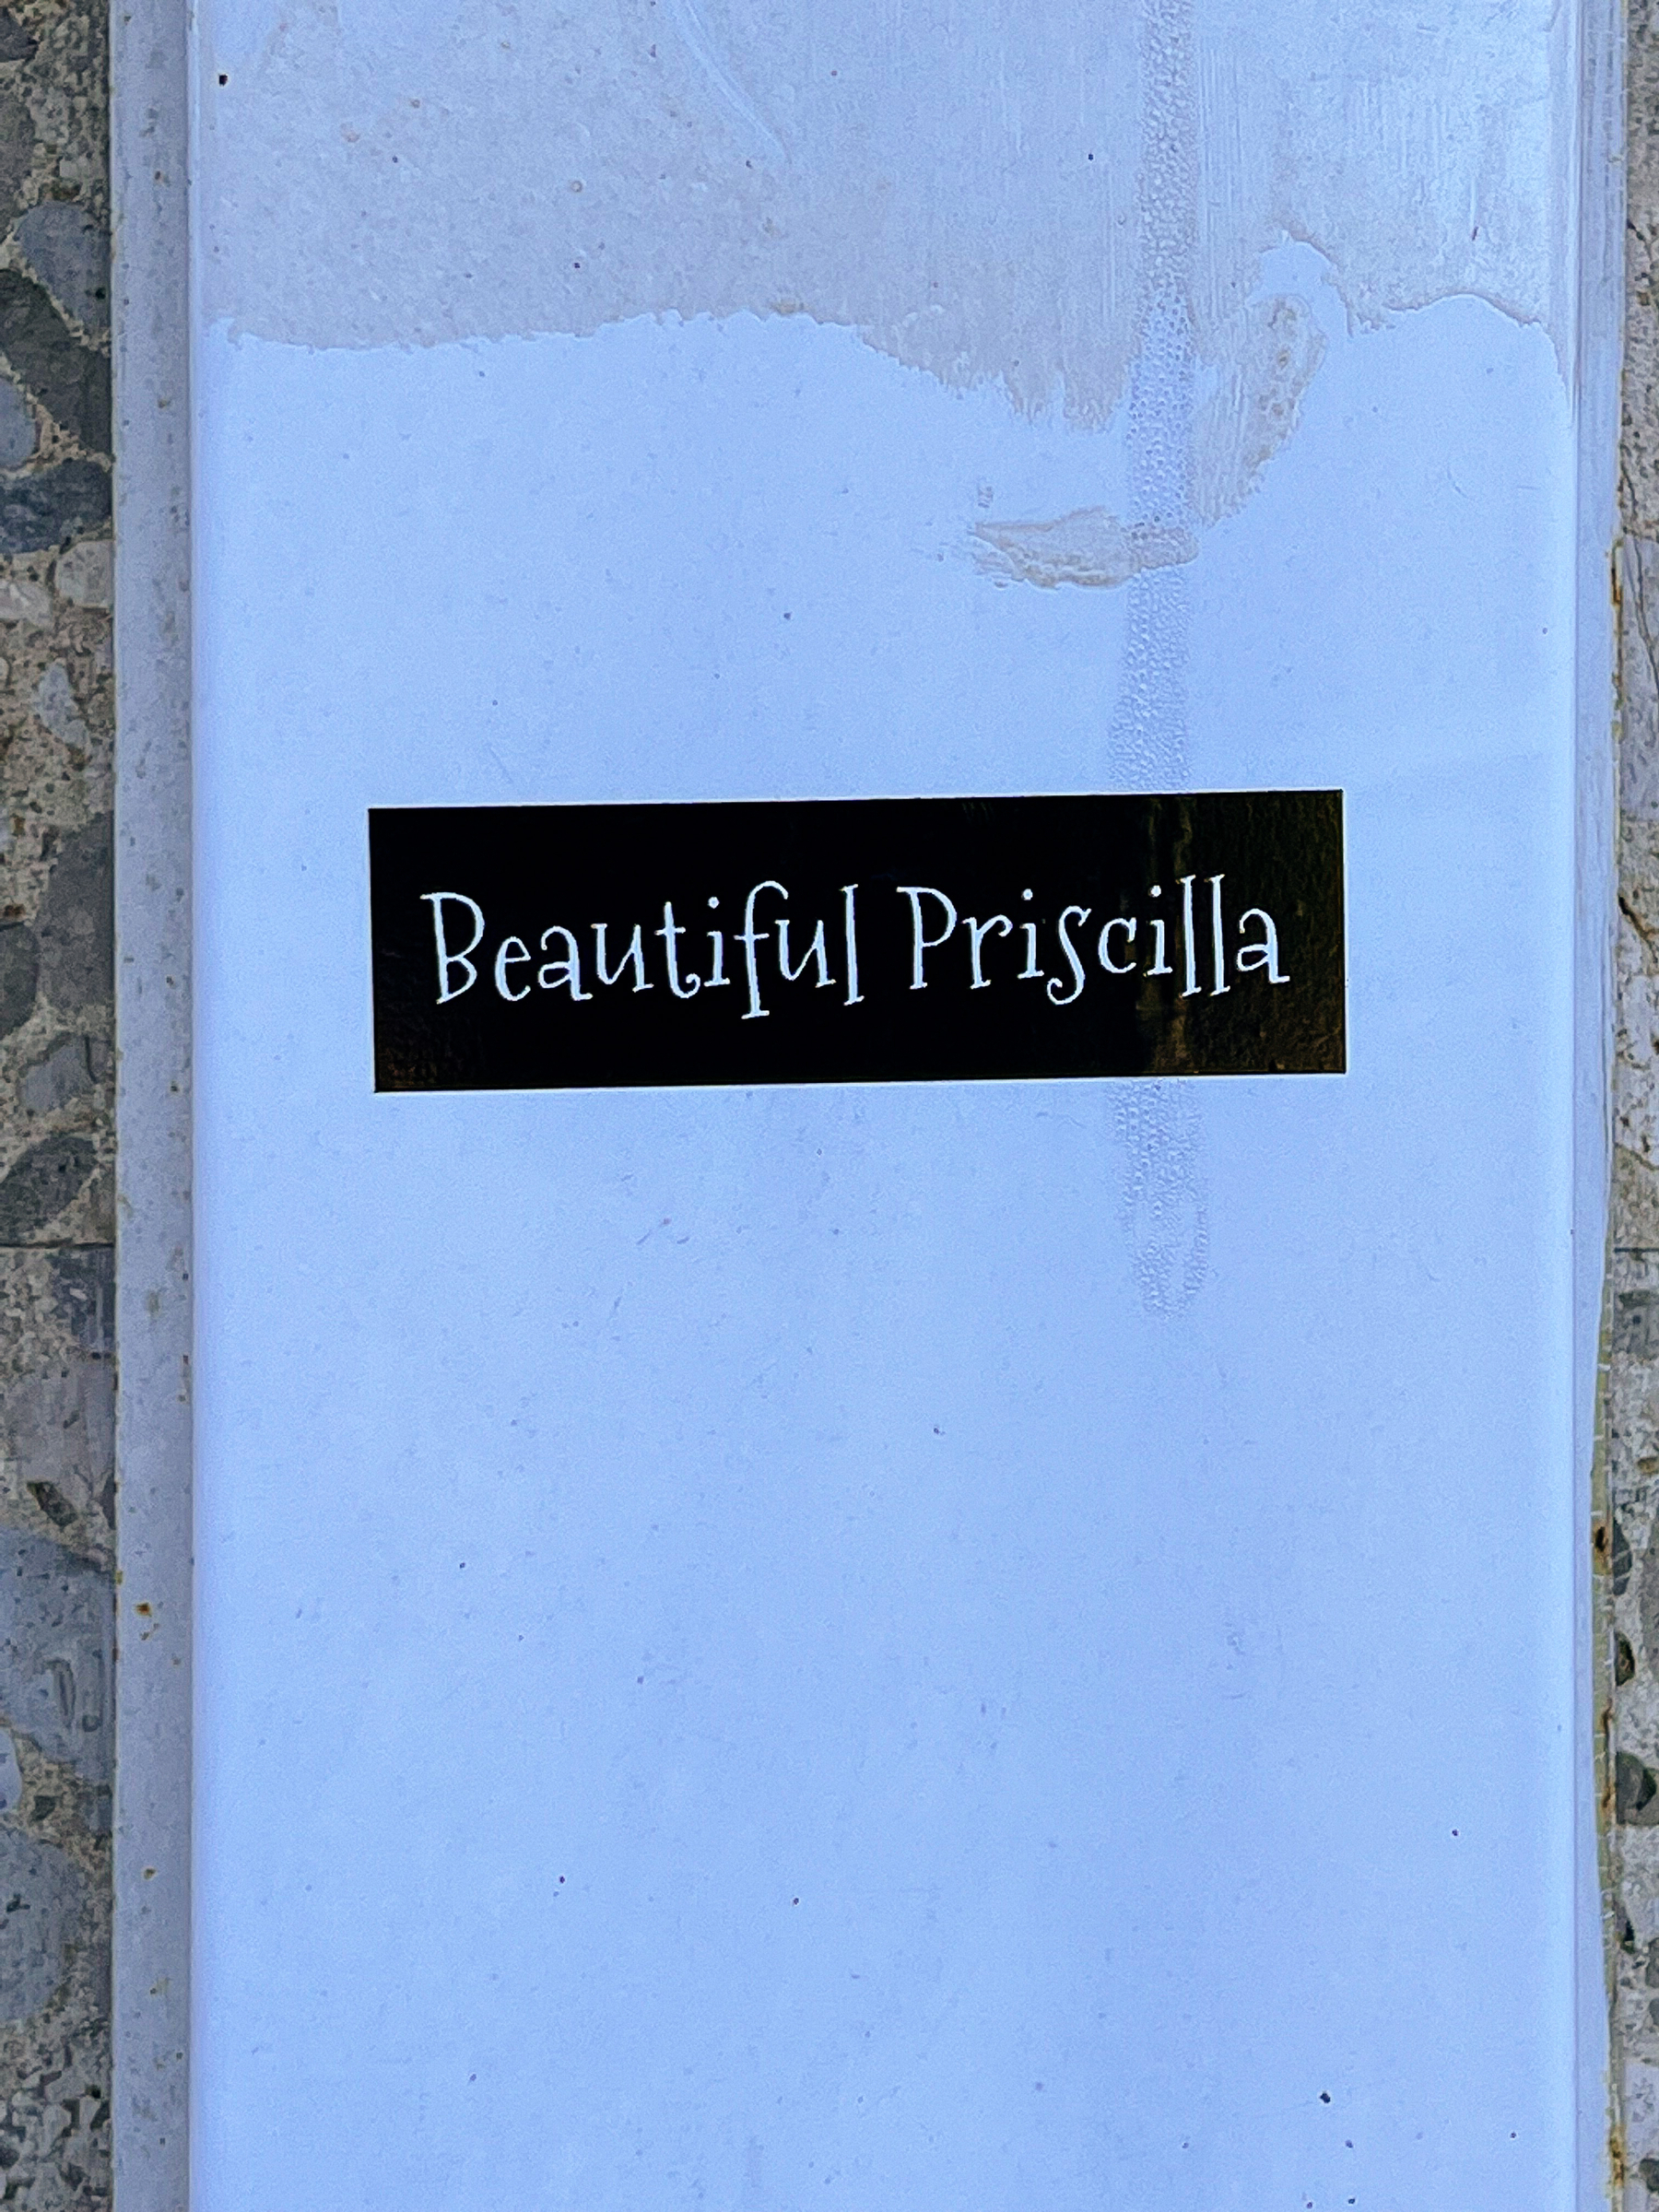 A simple sticker, with the words “Beautiful Priscilla”. 